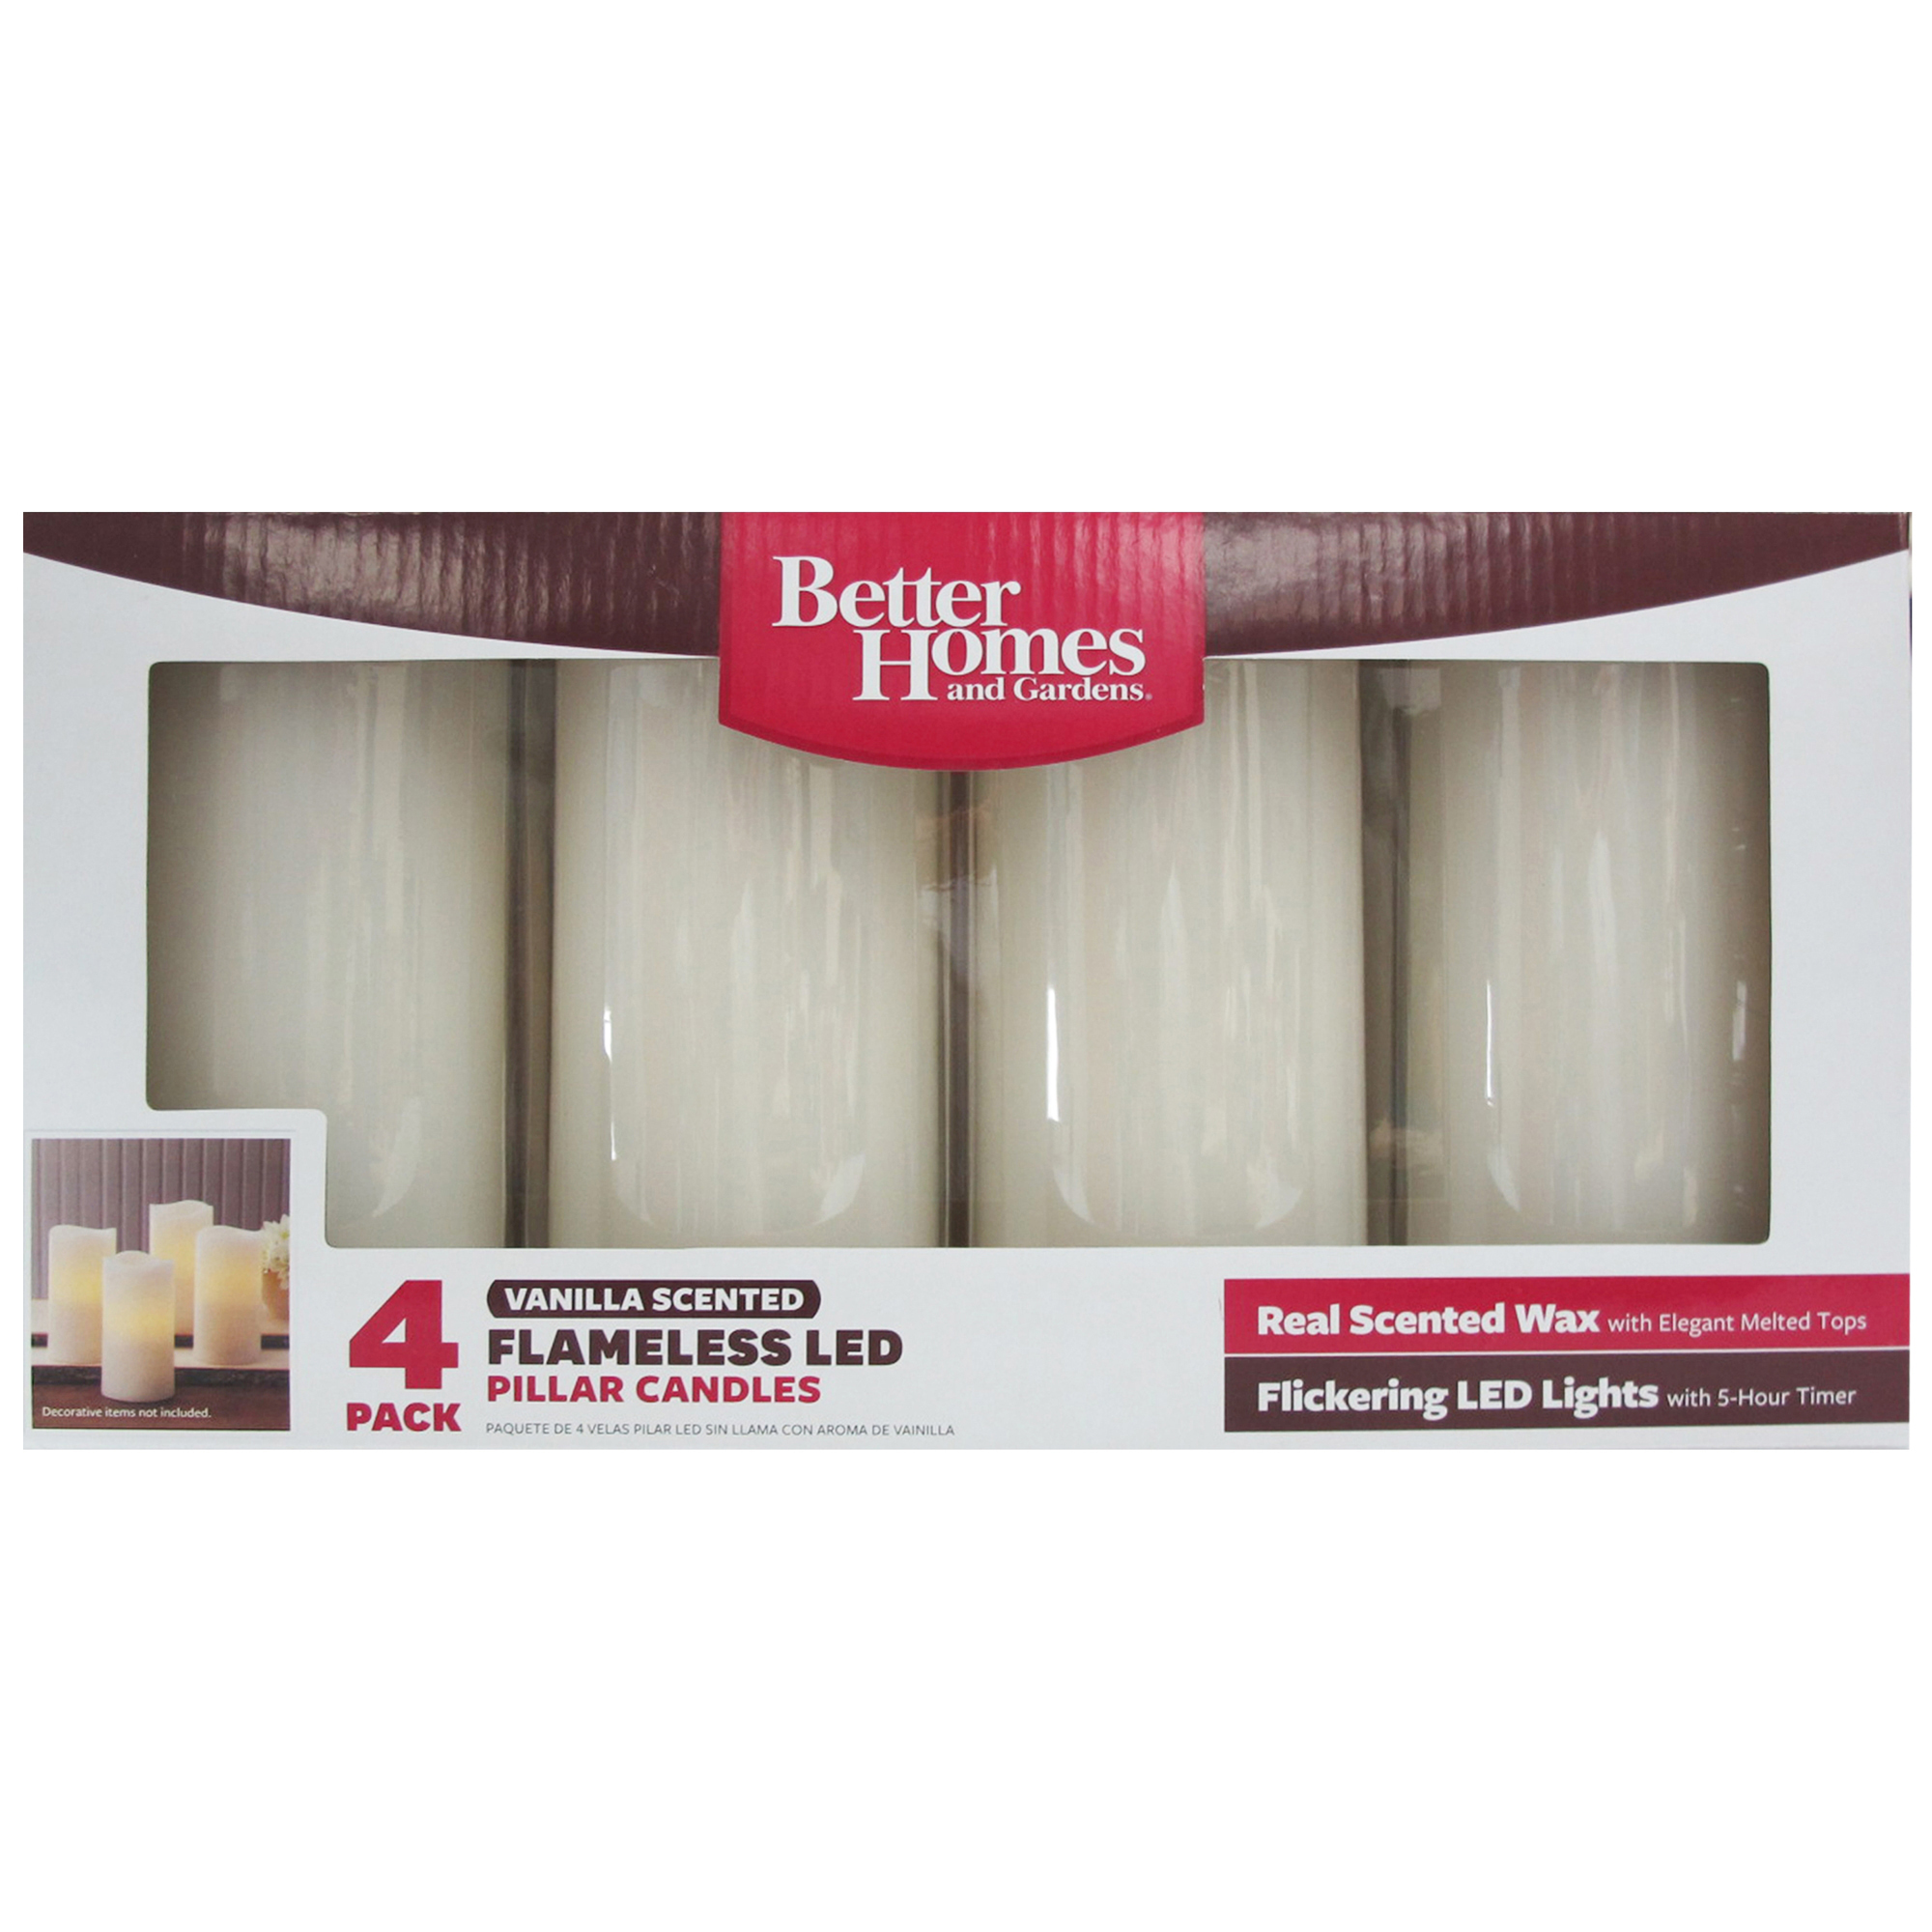 Better Homes and Gardens Flameless LED Pillar Candles 4-Pack, Vanilla Scented - image 2 of 4